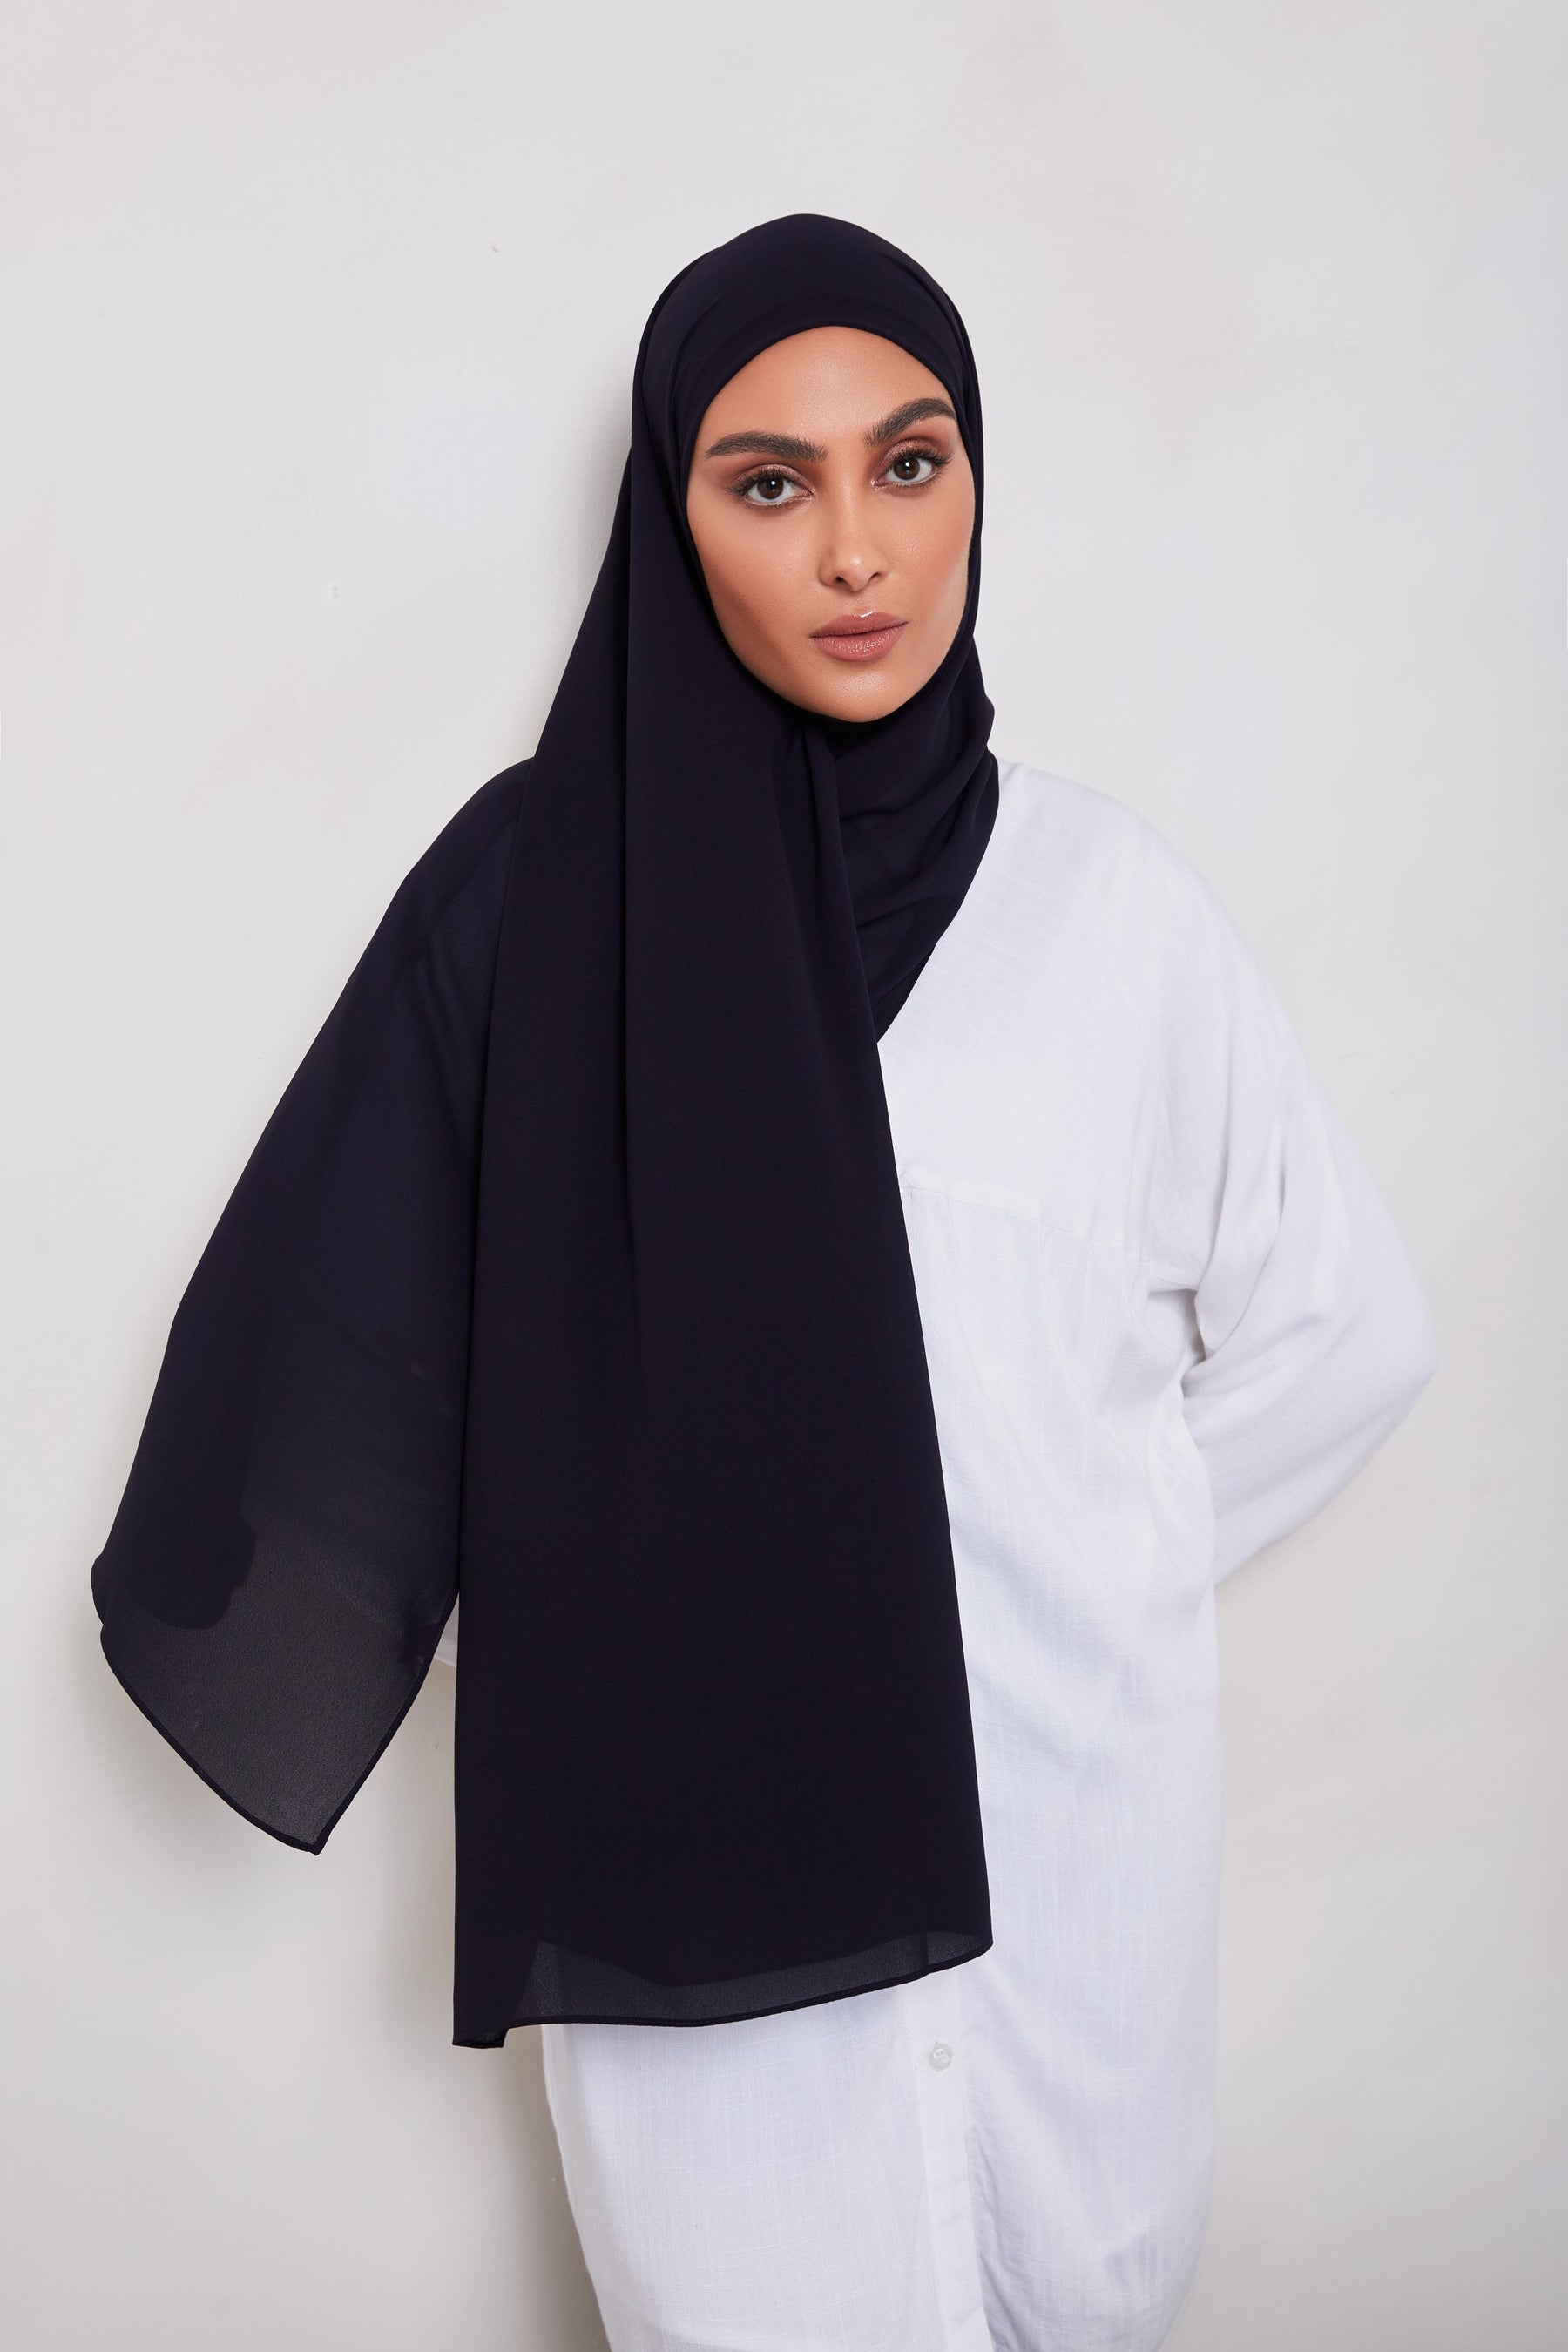 TEXTURE Everyday Chiffon Hijab - Better in Black Veiled Collection 